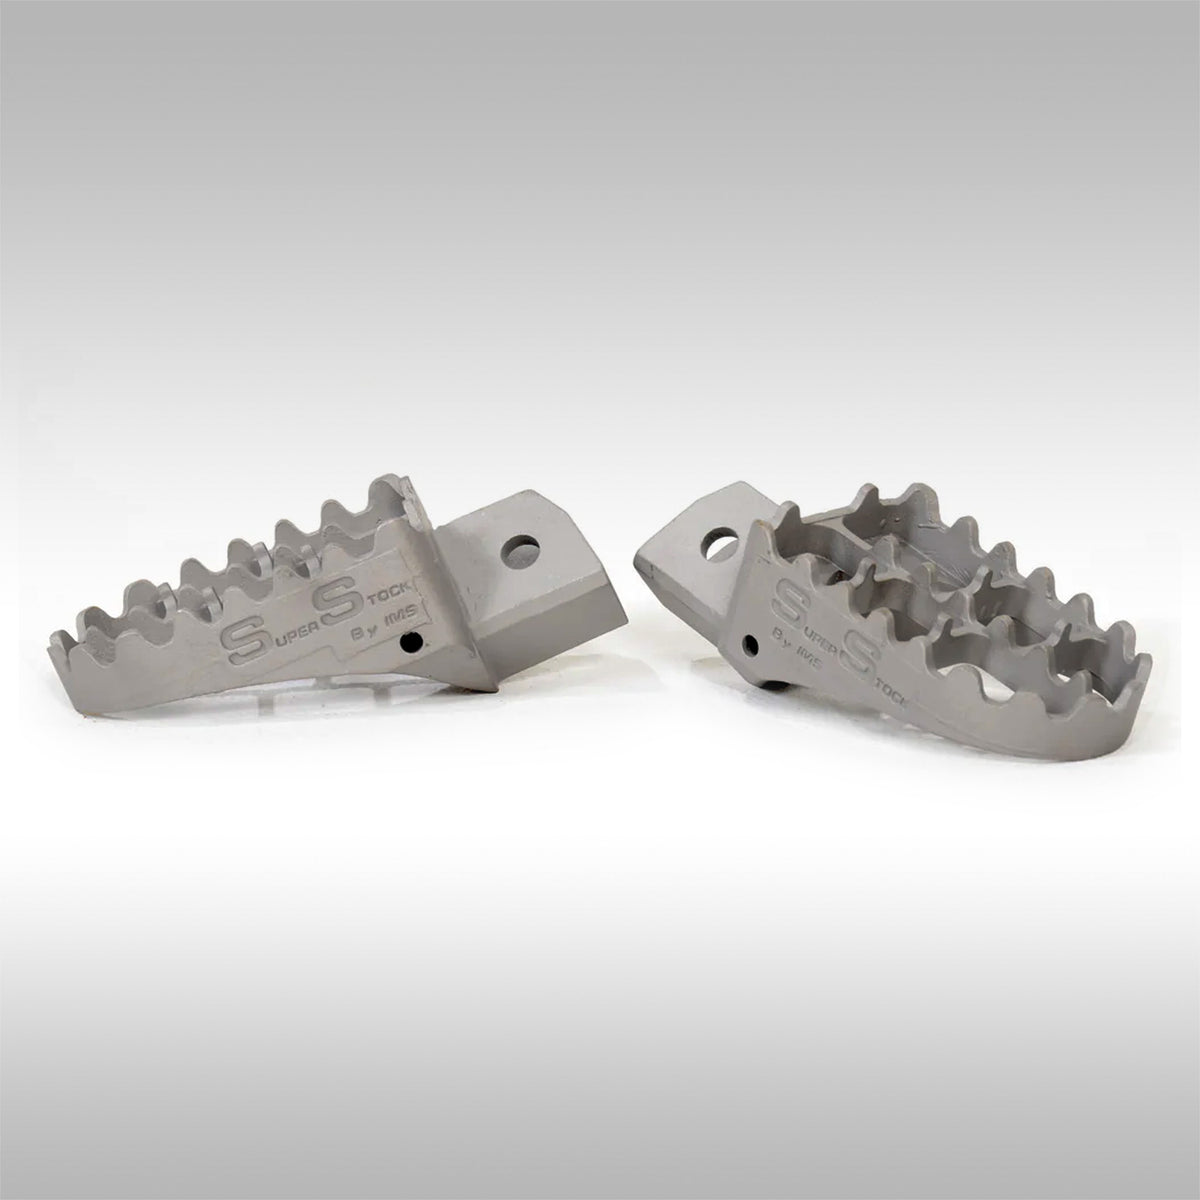 IMS PRODUCTS - SUPER STOCK FOOT PEGS  - HONDA